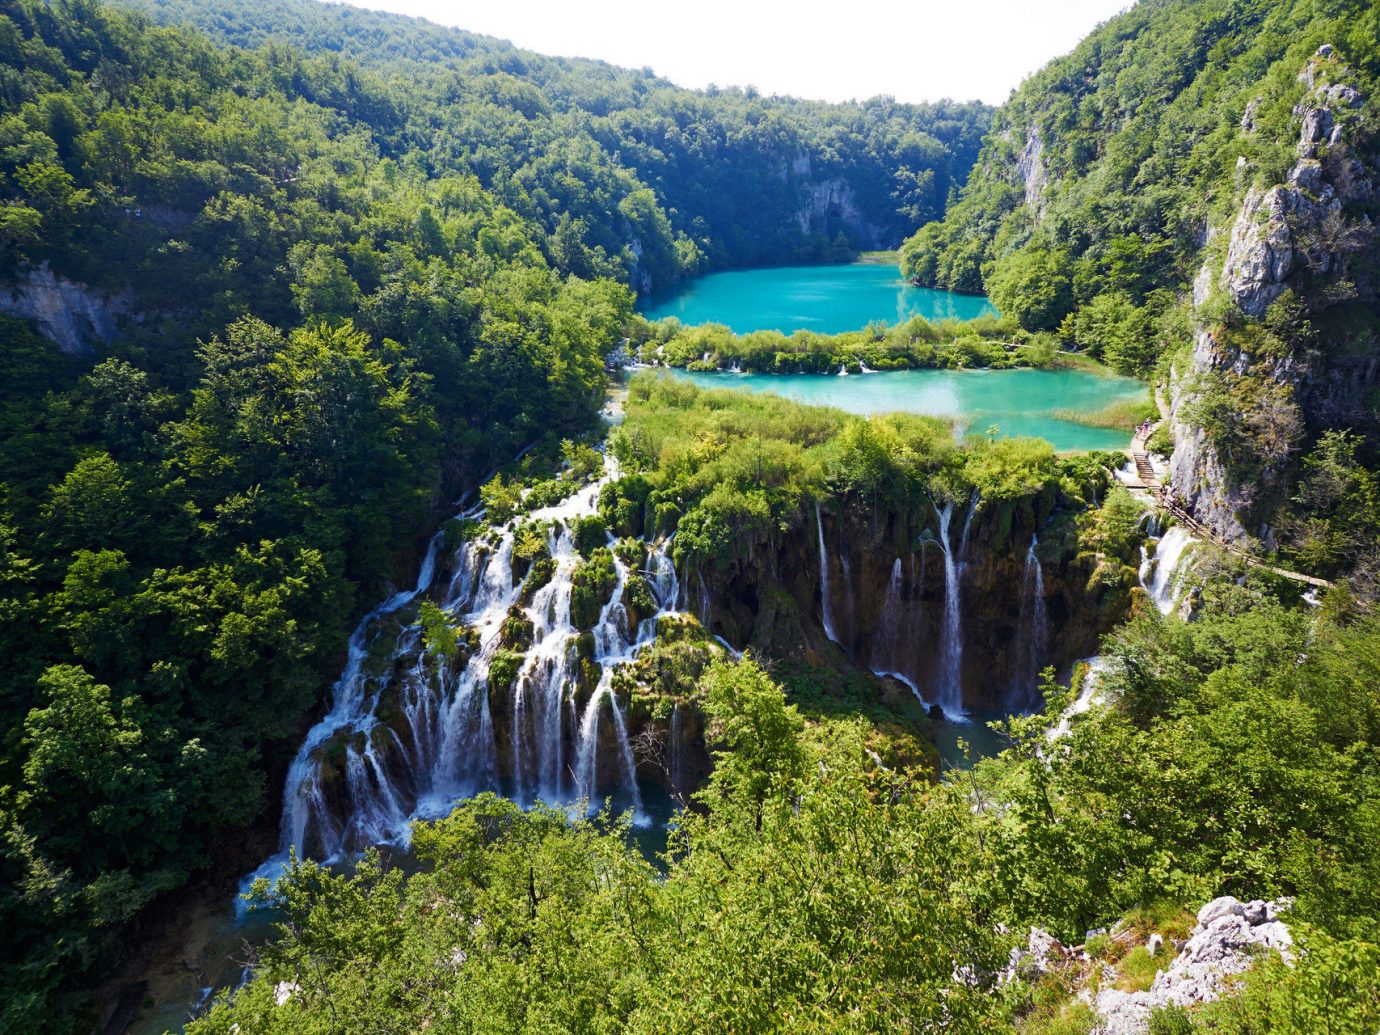 Croatia Eastern Europe europe Montenegro Slovenia Trip Ideas tree outdoor mountain Waterfall body of water Nature River water feature Forest park fjord Lake rainforest reservoir national park hillside wooded surrounded lush